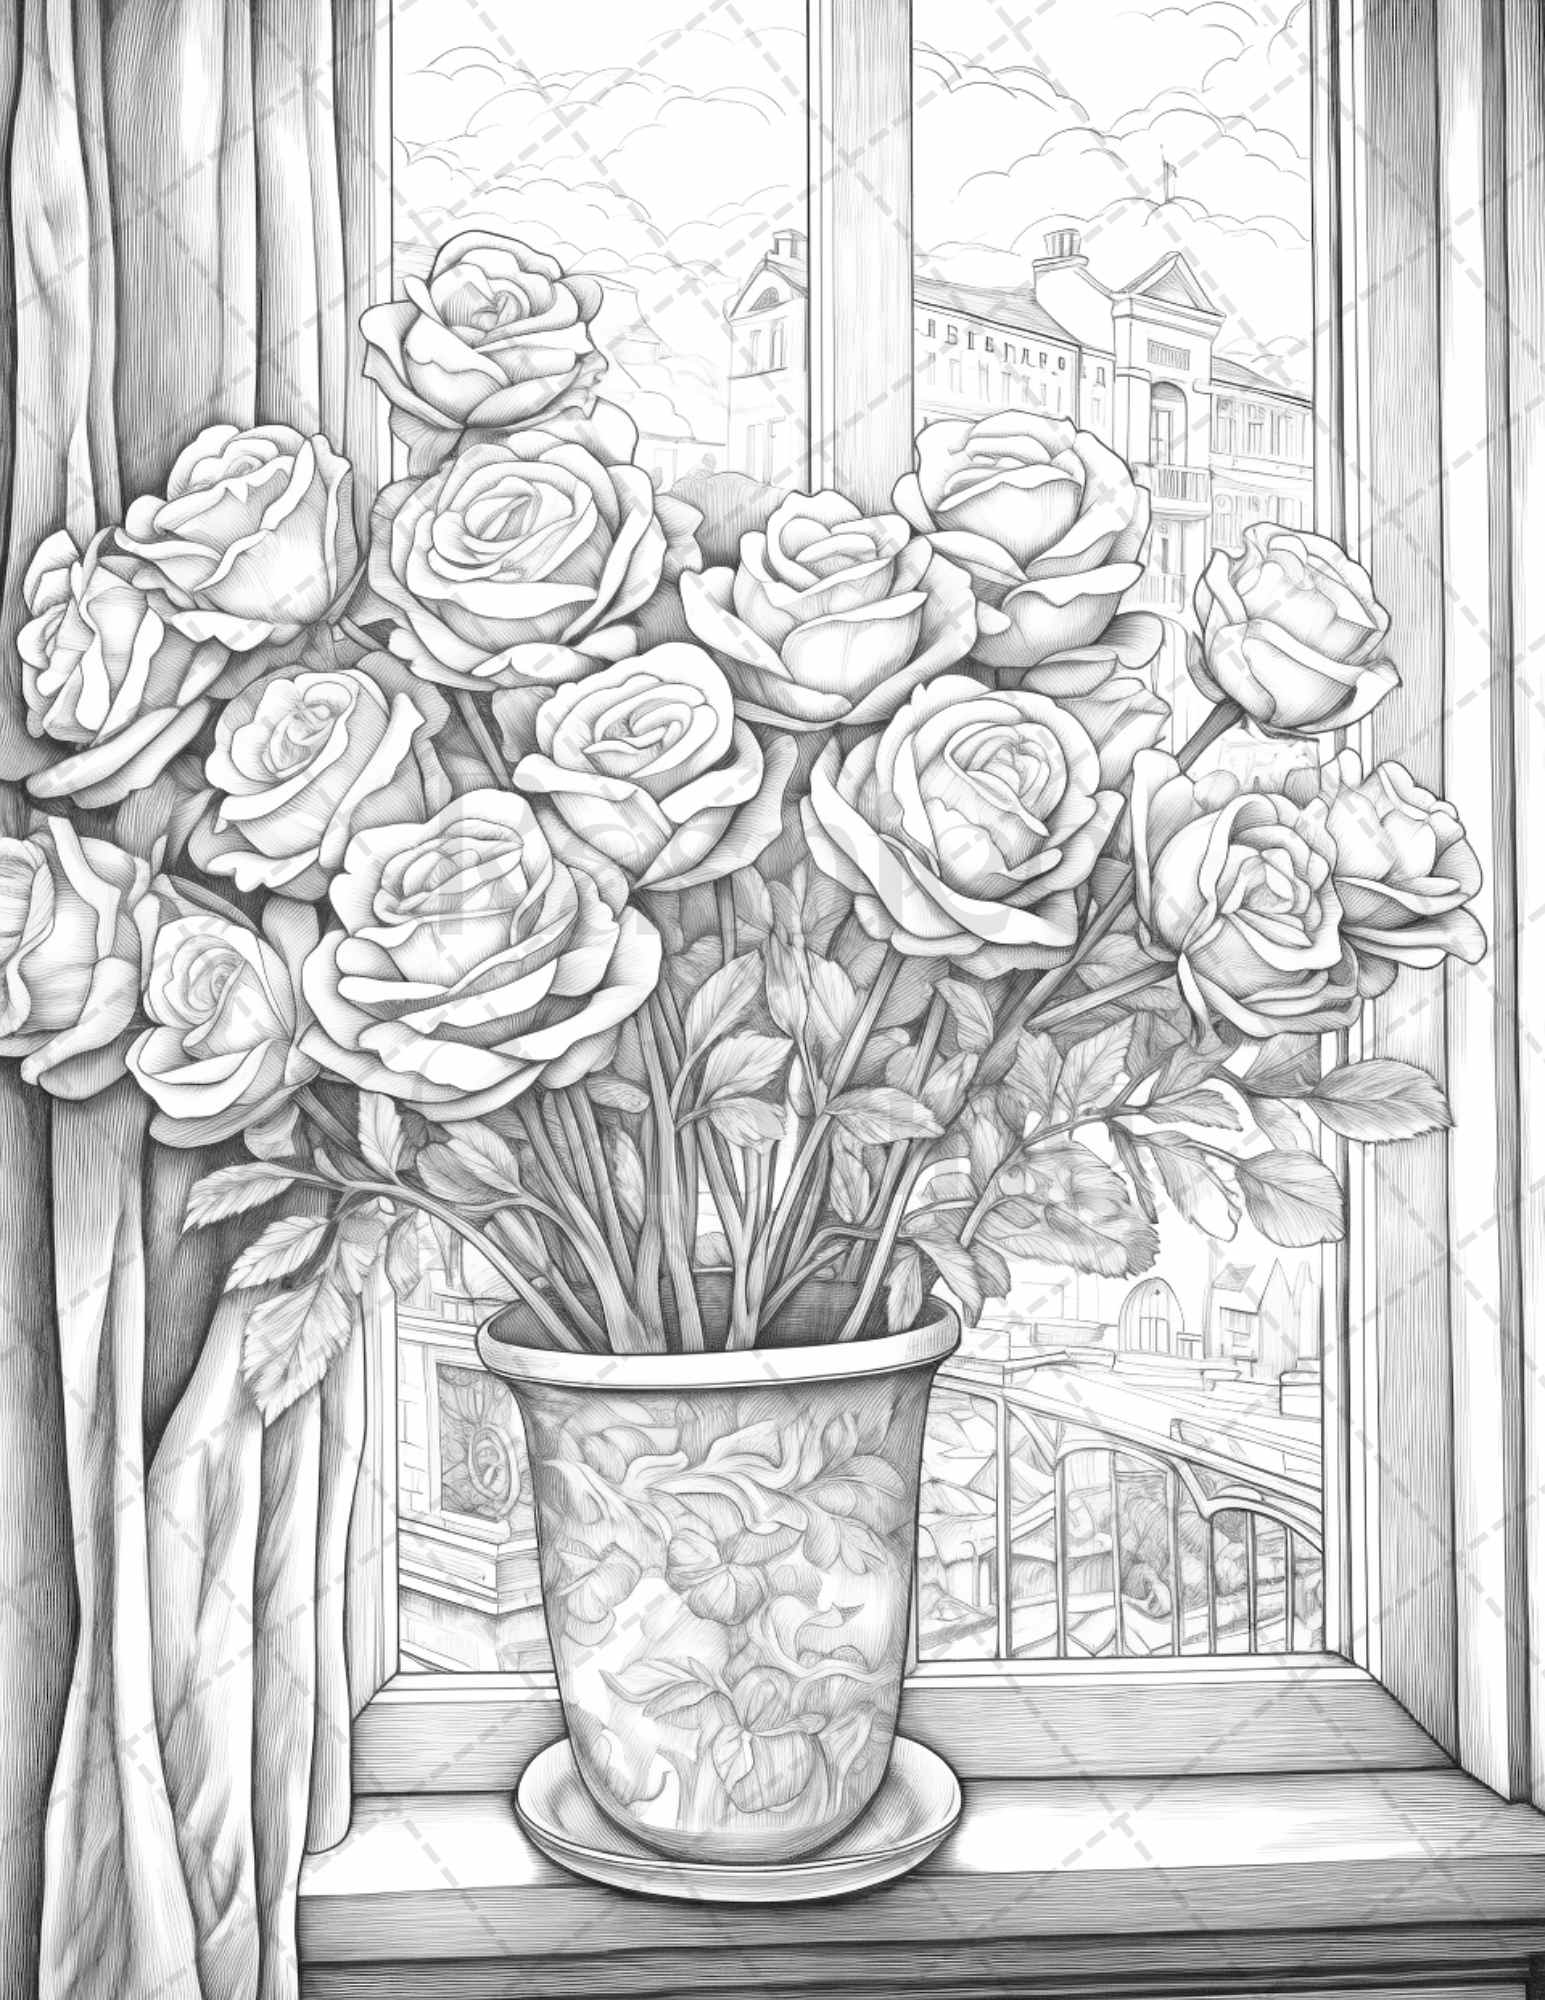 grayscale coloring page with captivating roses, printable adult coloring page with roses in grayscale, rose drawings for grayscale coloring, floral grayscale coloring sheet for adults, high-quality grayscale art with rose patterns